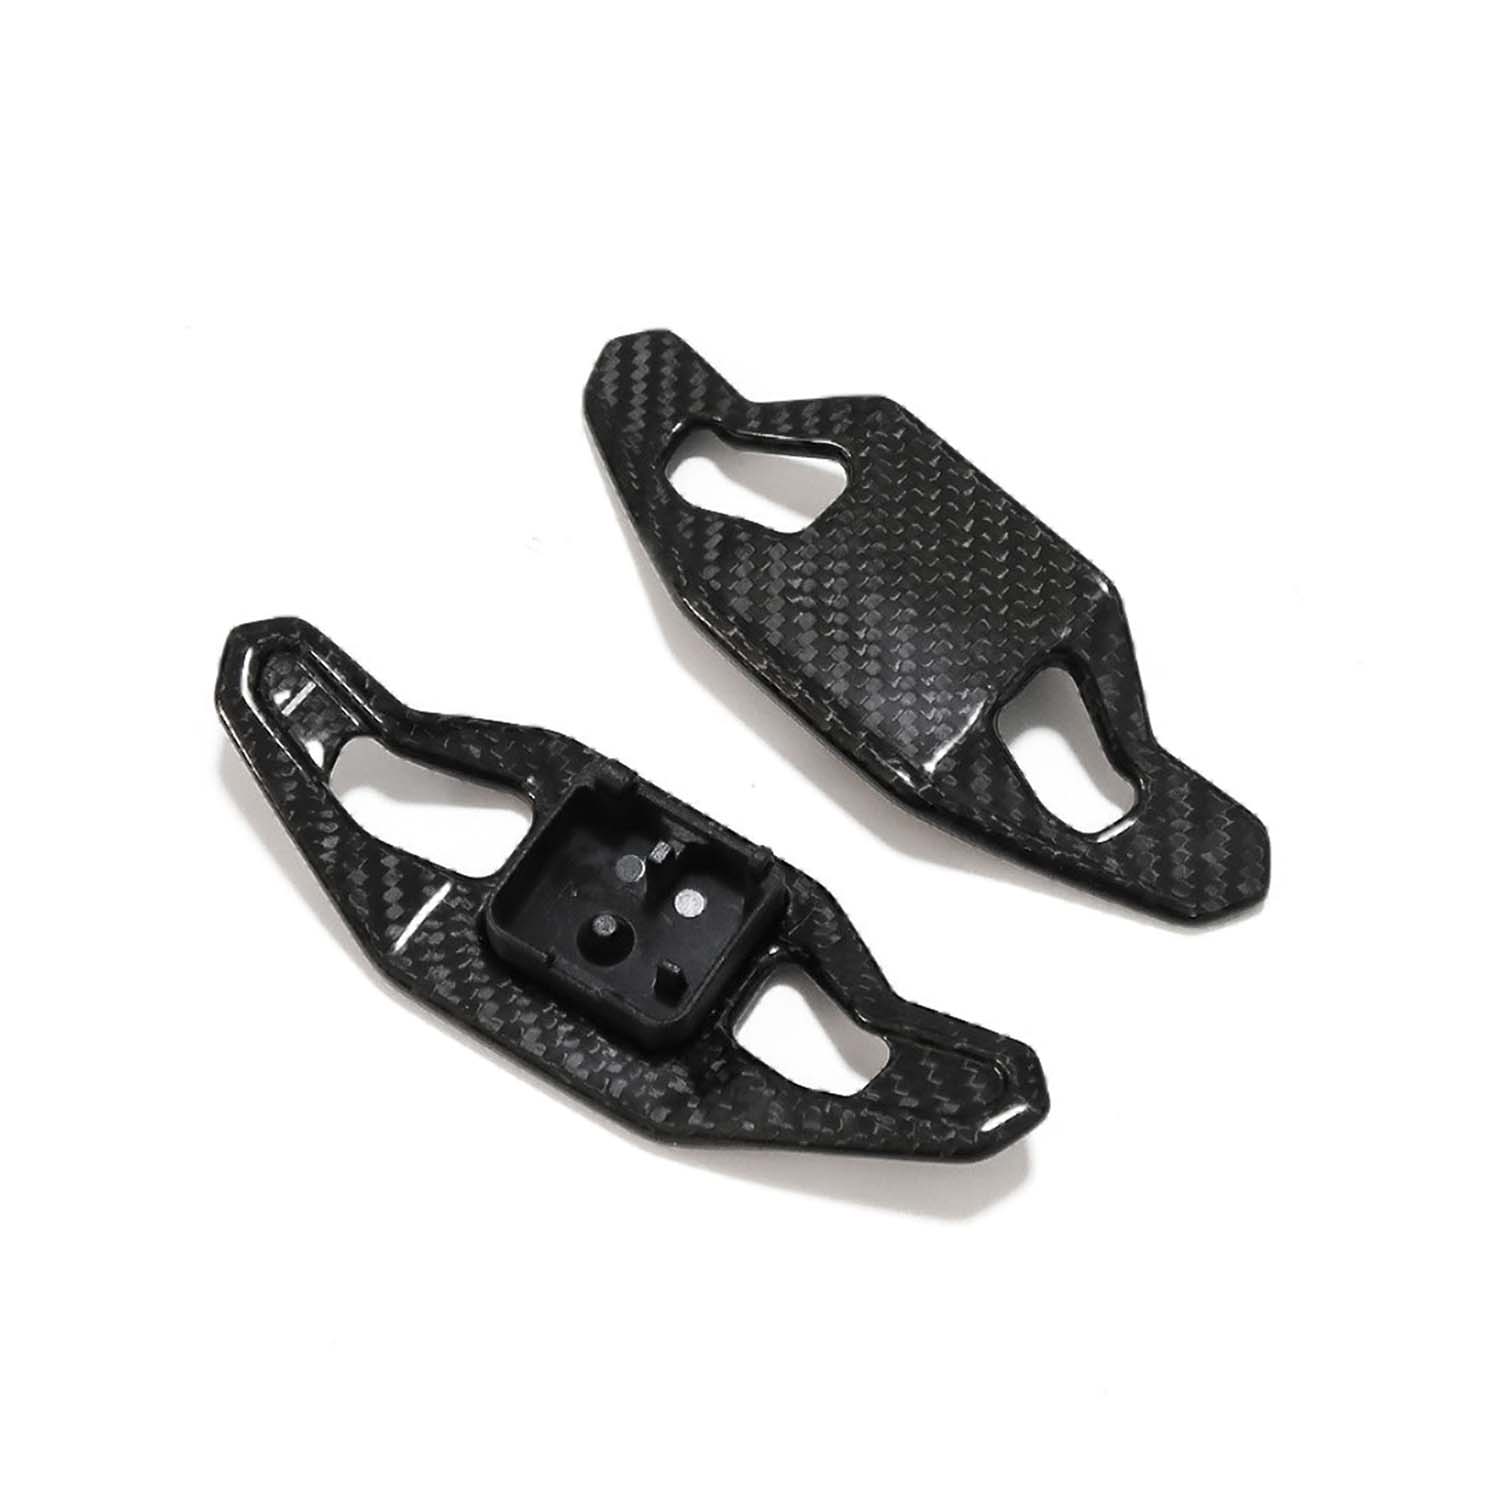 SHFT Audi A3/S3/RS3/TTRS/R8 'Urus Style' Paddle Shifters In Pre Preg Carbon Fibre-R44 Performance